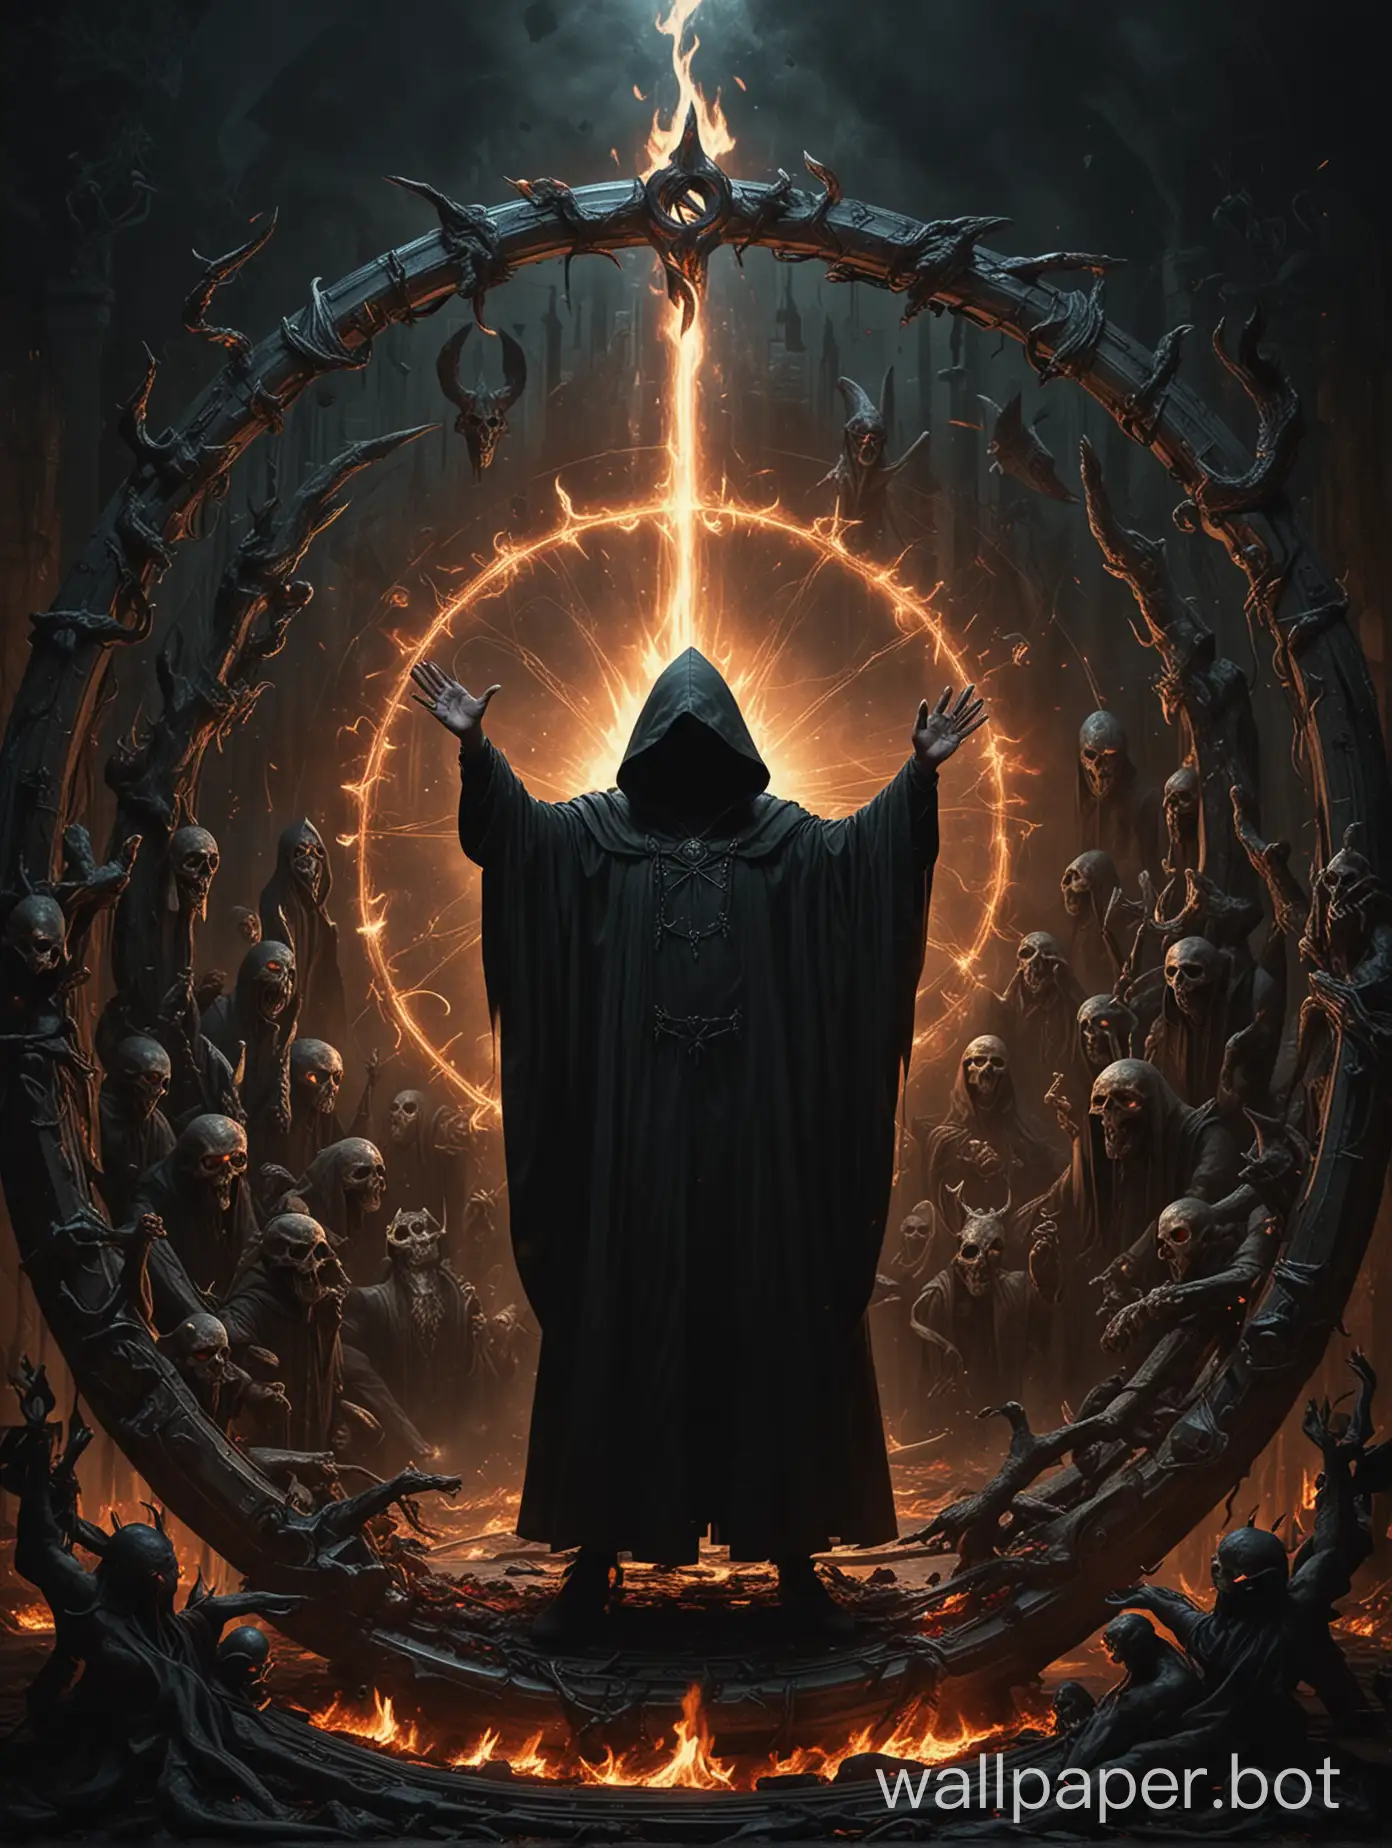 Image of a man in a hooded cloak standing in front of a circular object, holding his arms up, creatures can be seen in the background, occultist, dark metal music art, cultist, sacred flame magic, abstract occult epic composition, diablo digital concept art, album art, god of death, detailed cover artwork, king of time, the allfather, dark soul concept
